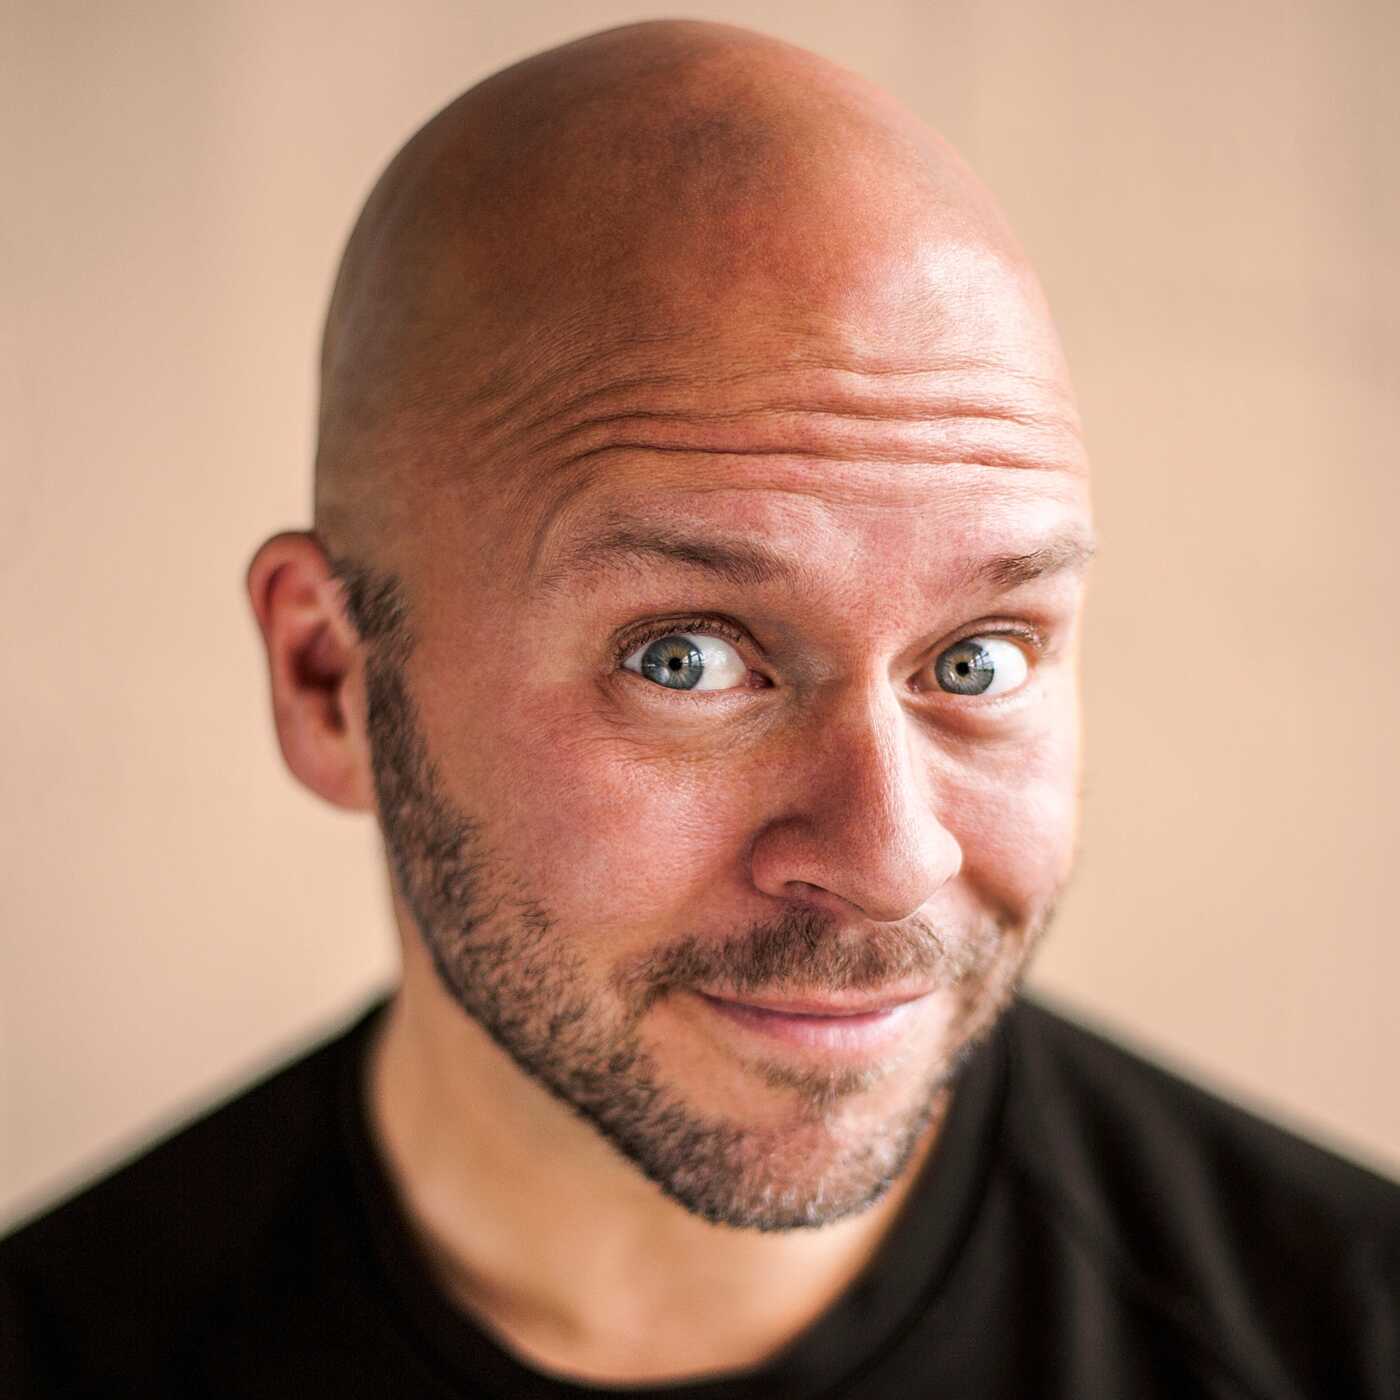 Derek Sivers & His Son Moved to Oxford, England for the Schools